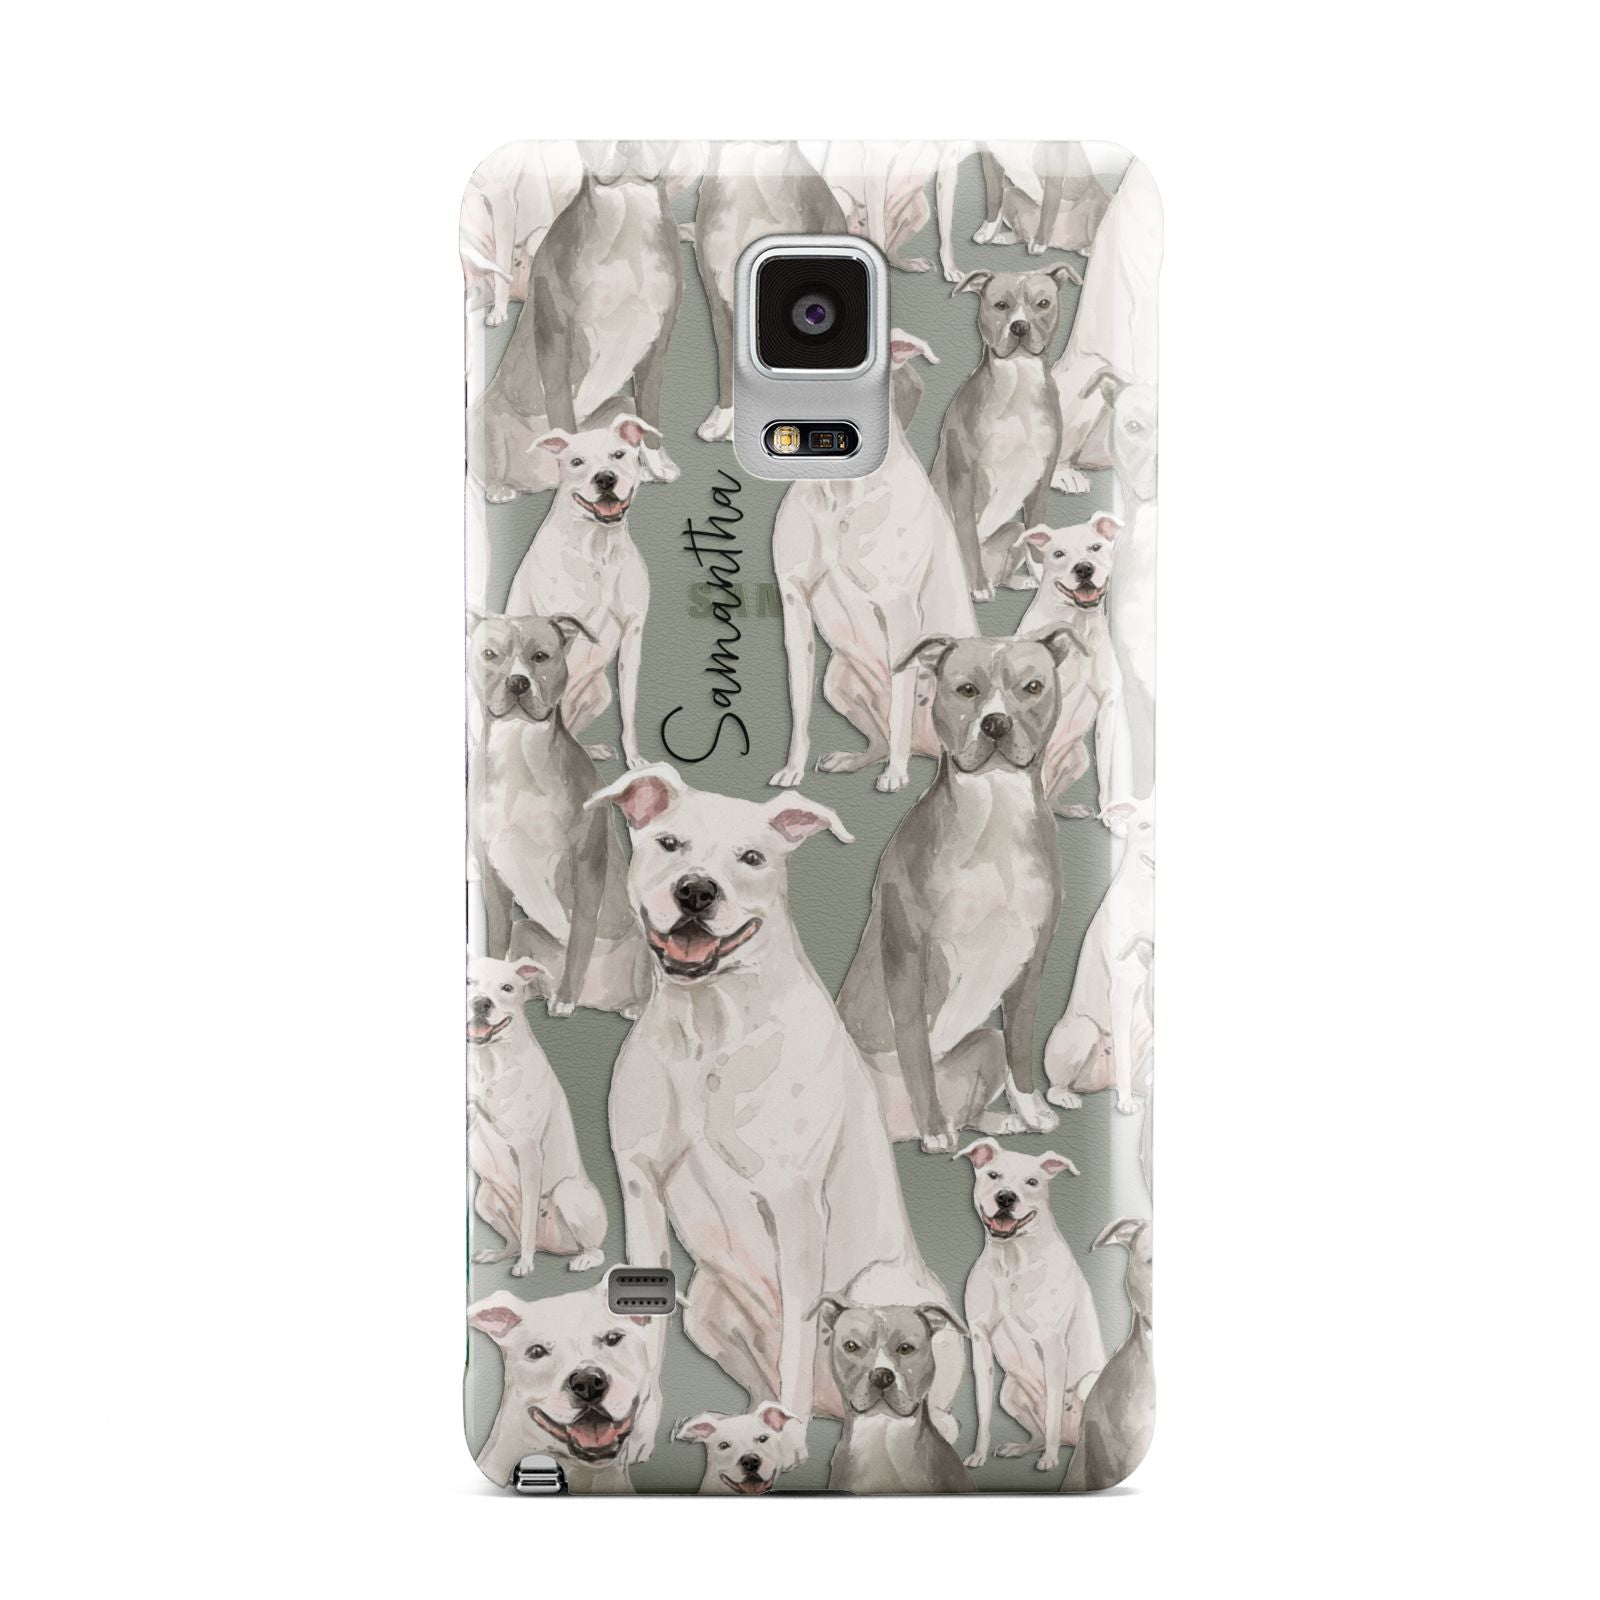 Personalised Staffordshire Dog Samsung Galaxy Note 4 Case